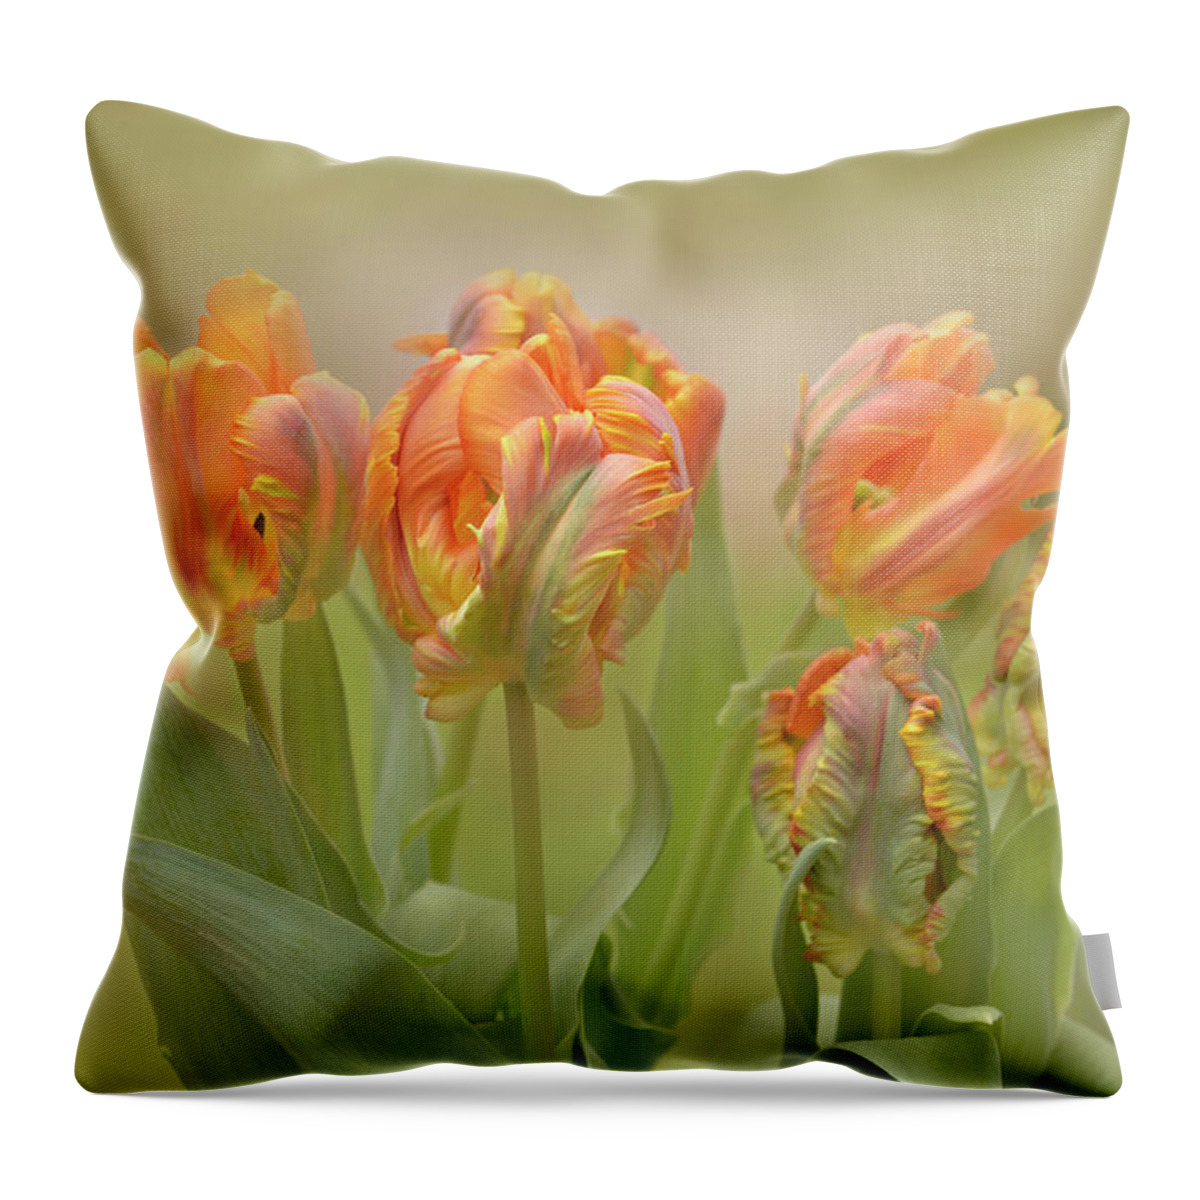 Abstract Throw Pillow featuring the photograph Dreamy Parrot Tulips by Ann Bridges